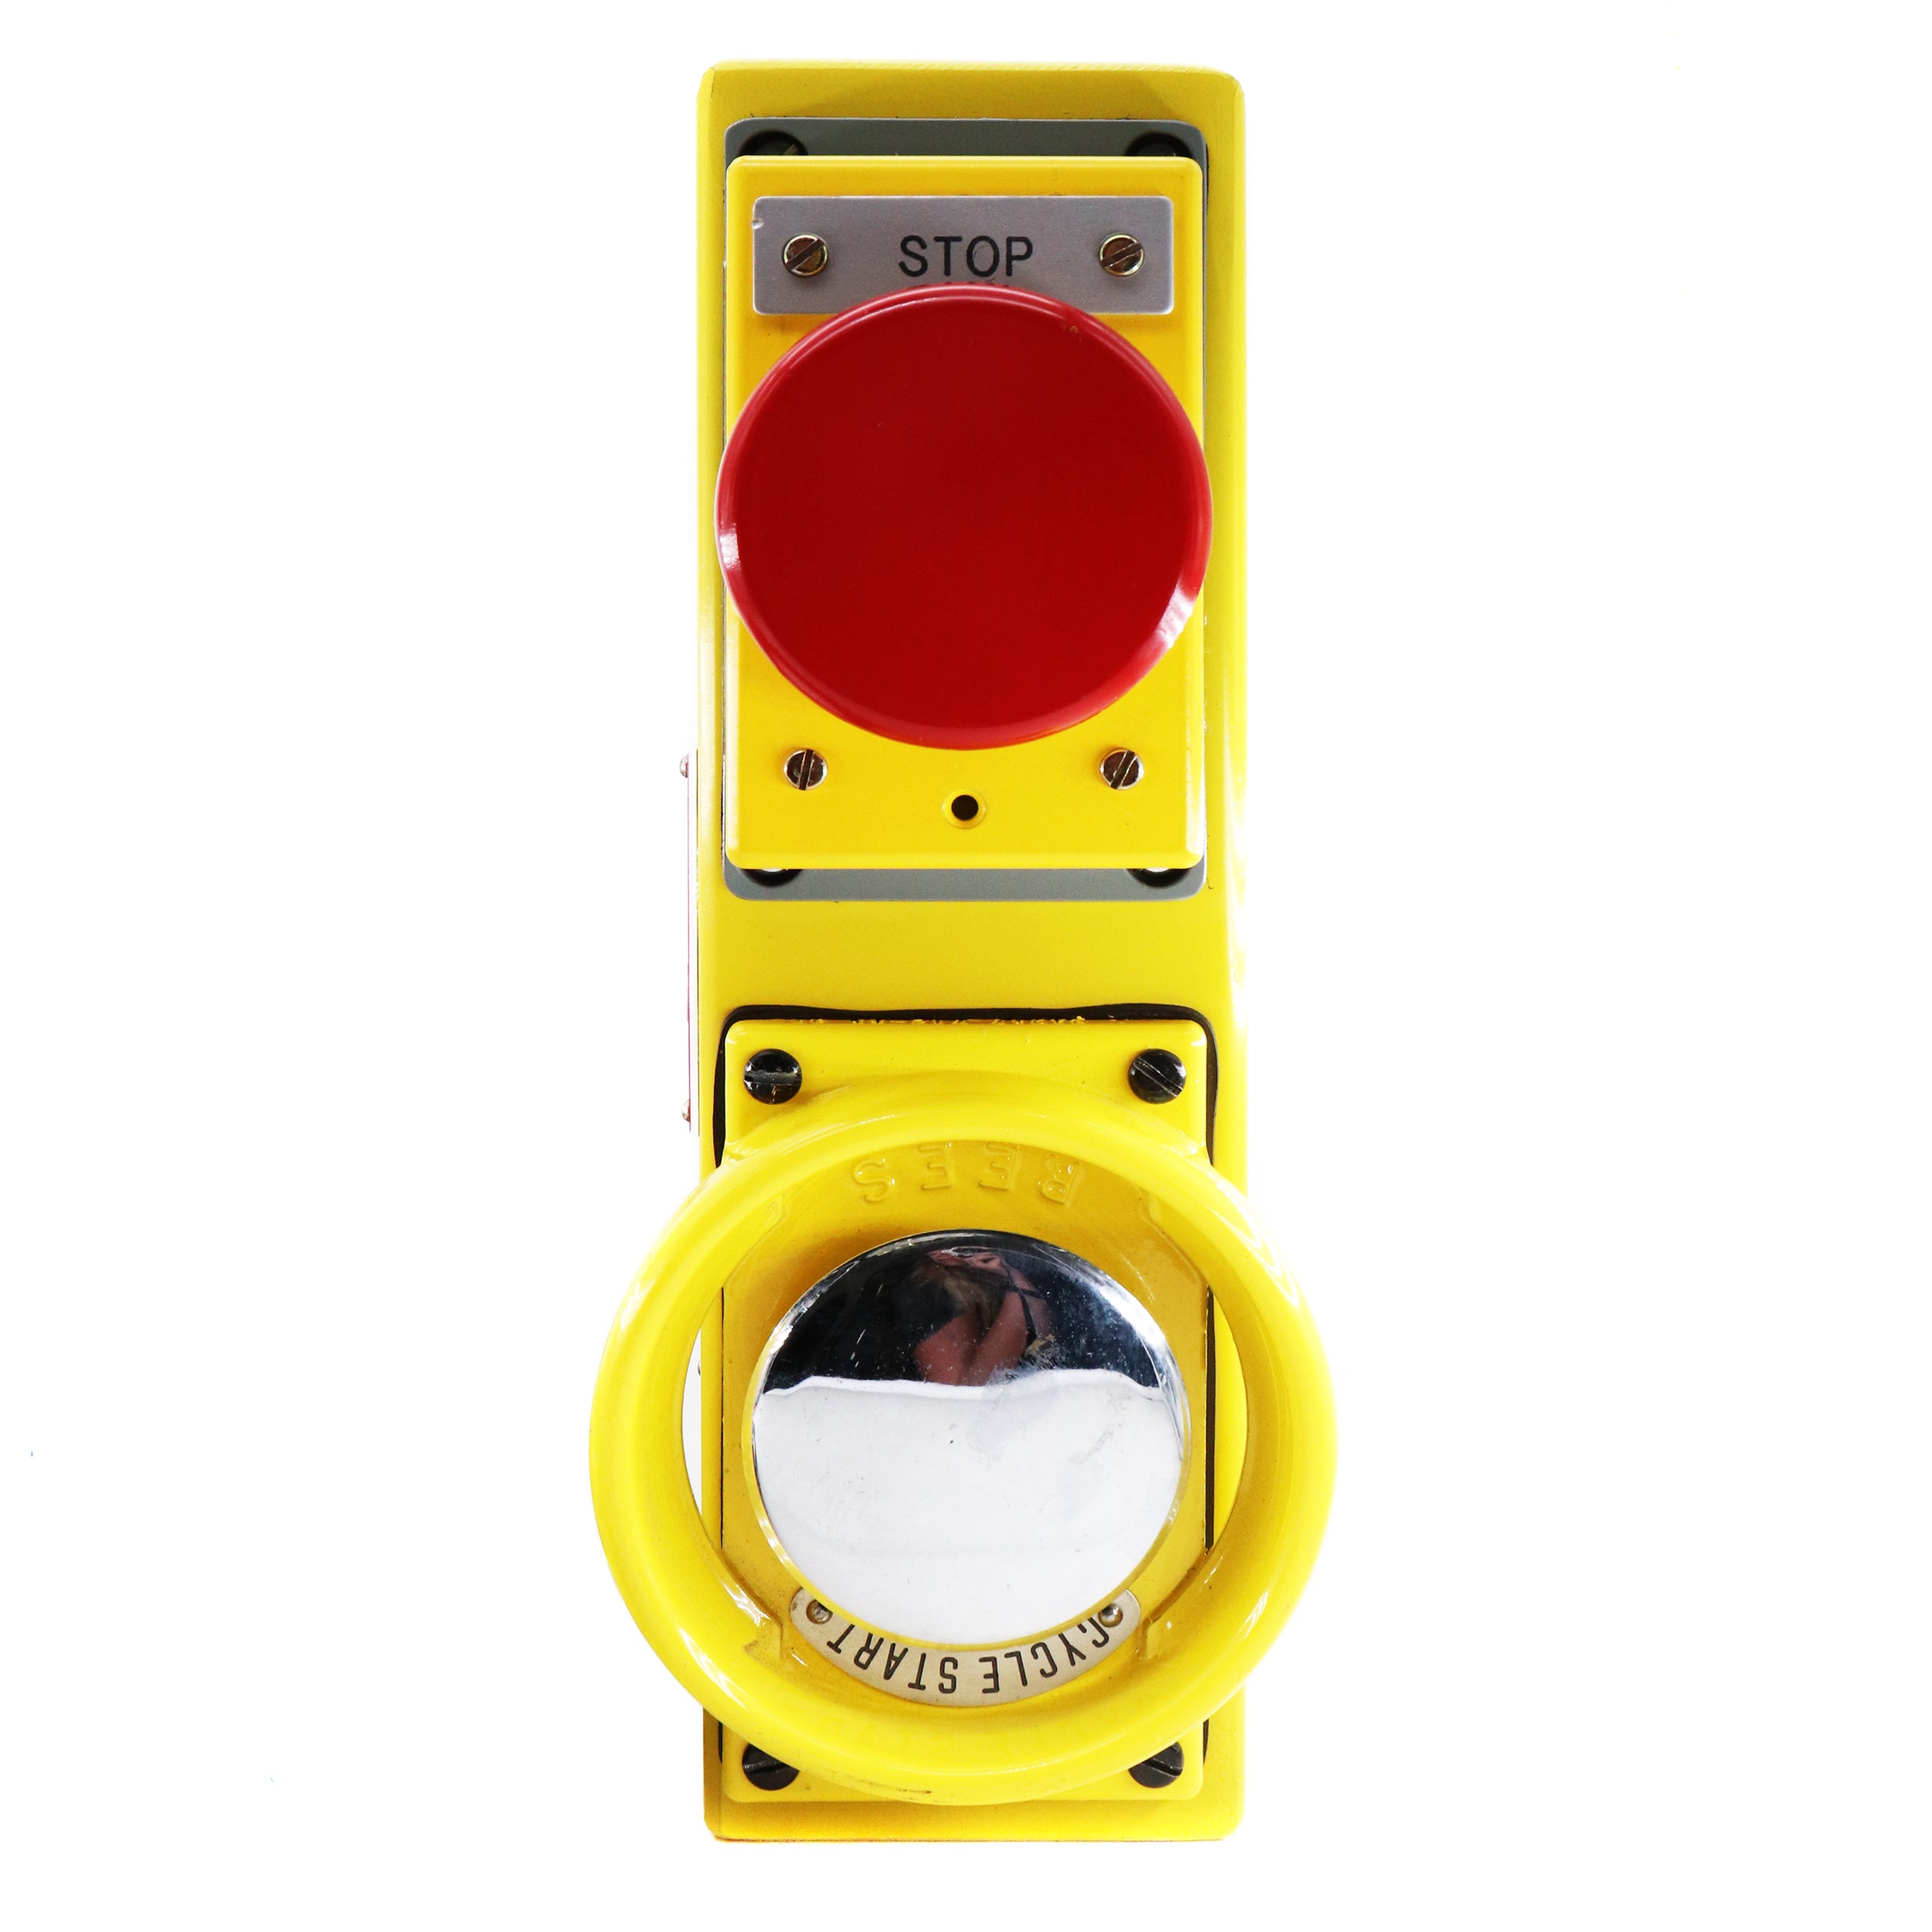 Electro-Matic Products Inc., ELECTRO-MATIC EXPLOSION PROOF PUSH BUTTON PALM OPERATED CONTROLLER, 800P-NX27